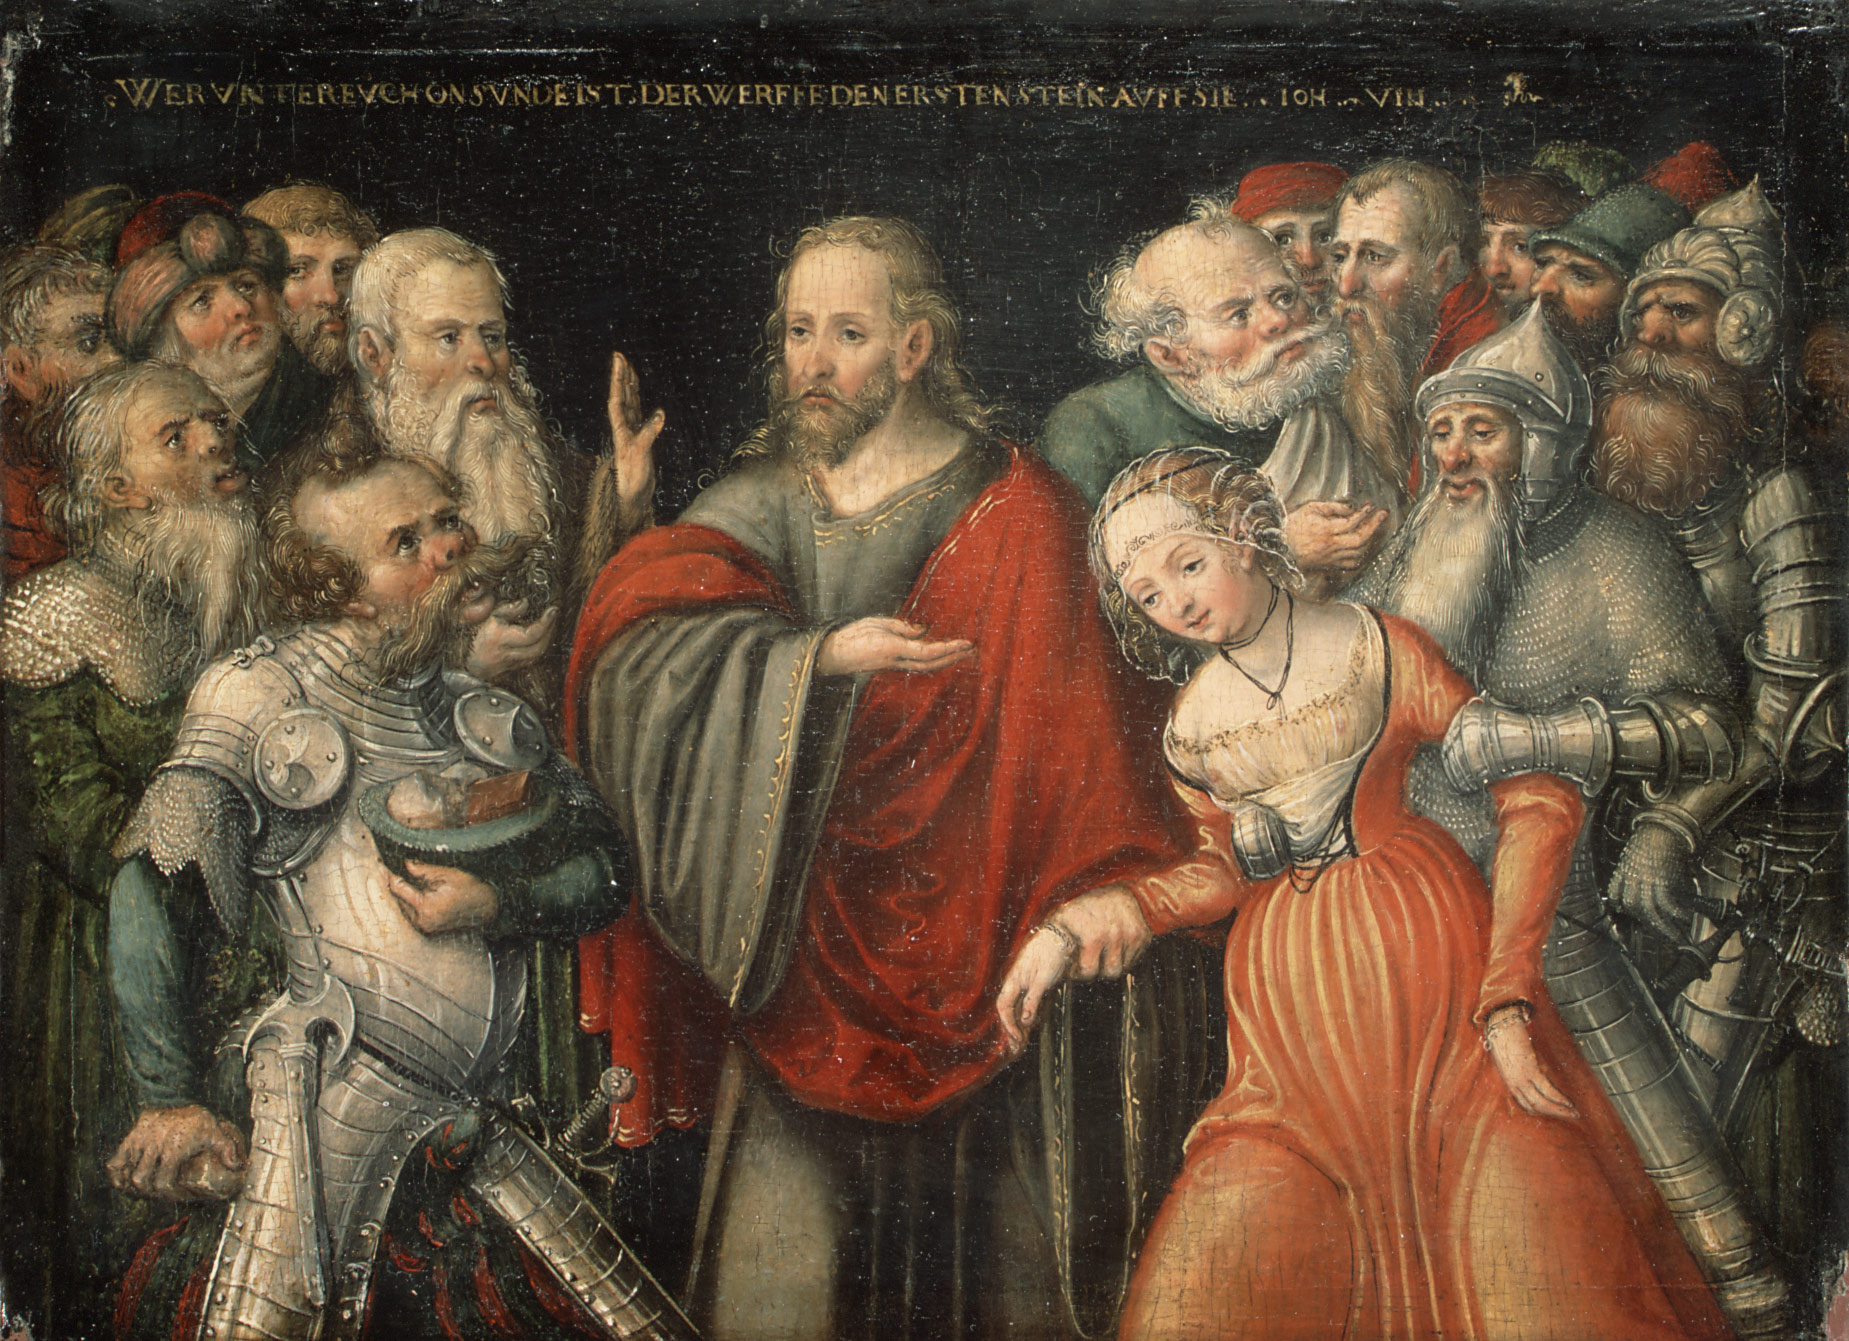 Christ and the Adulteress by Lucas Cranach the Younger and Workshop (image courtesy of The Met)